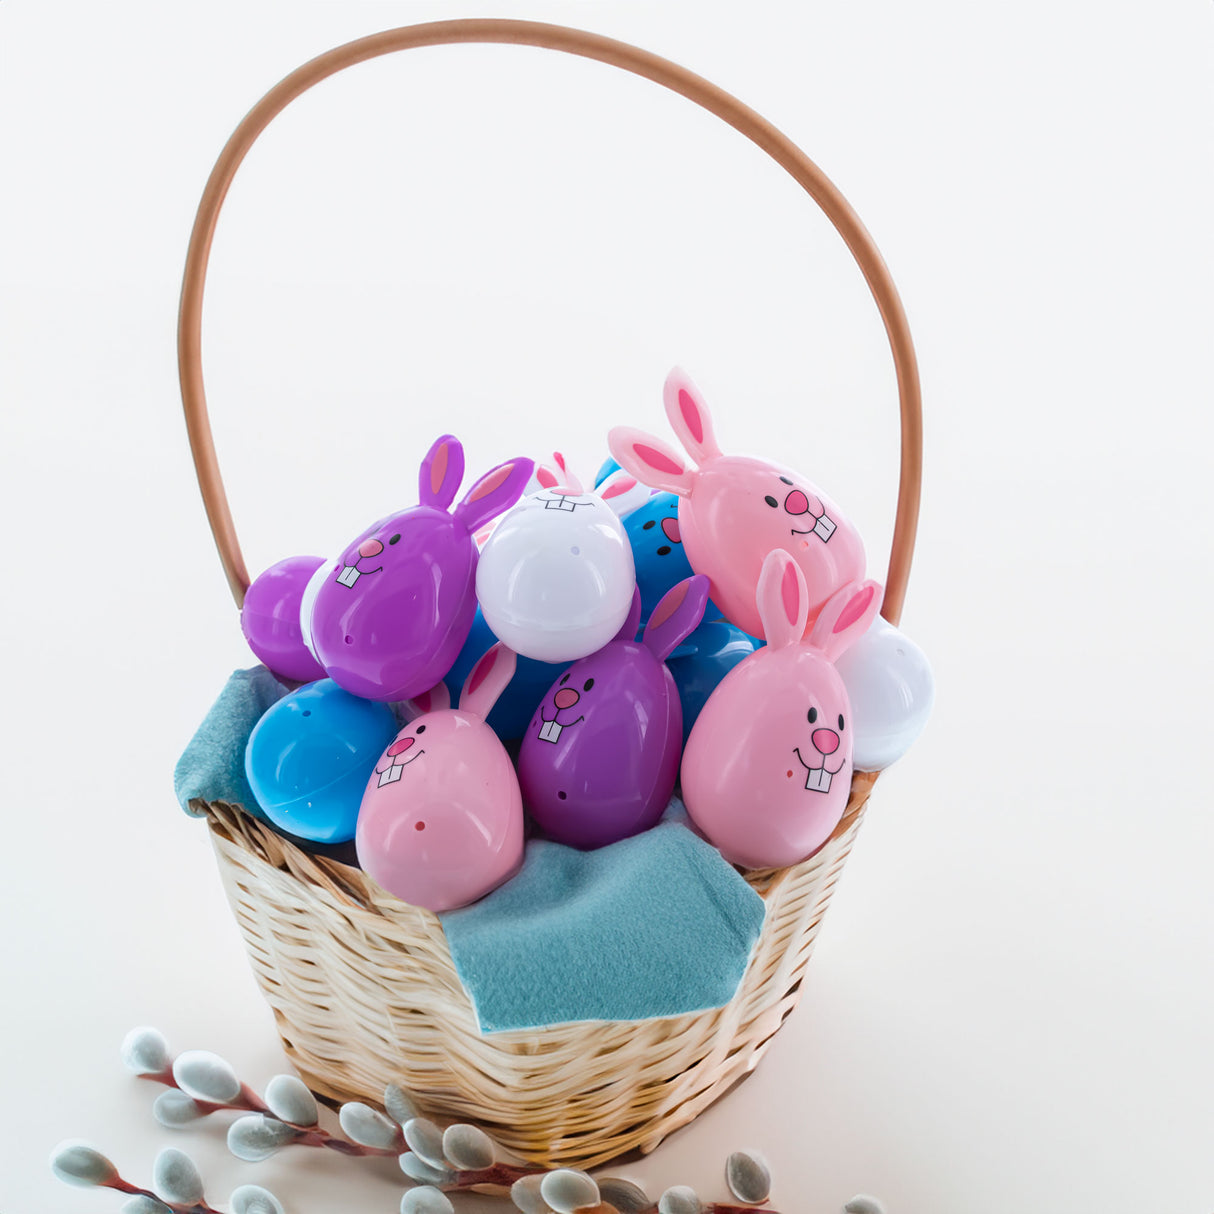 Sweet Bunny Surprise: Set of 16 Fillable Rabbit-Shaped Plastic Easter Eggs, 3.25 Inches ,dimensions in inches: 3.25 x 15 x 1.72